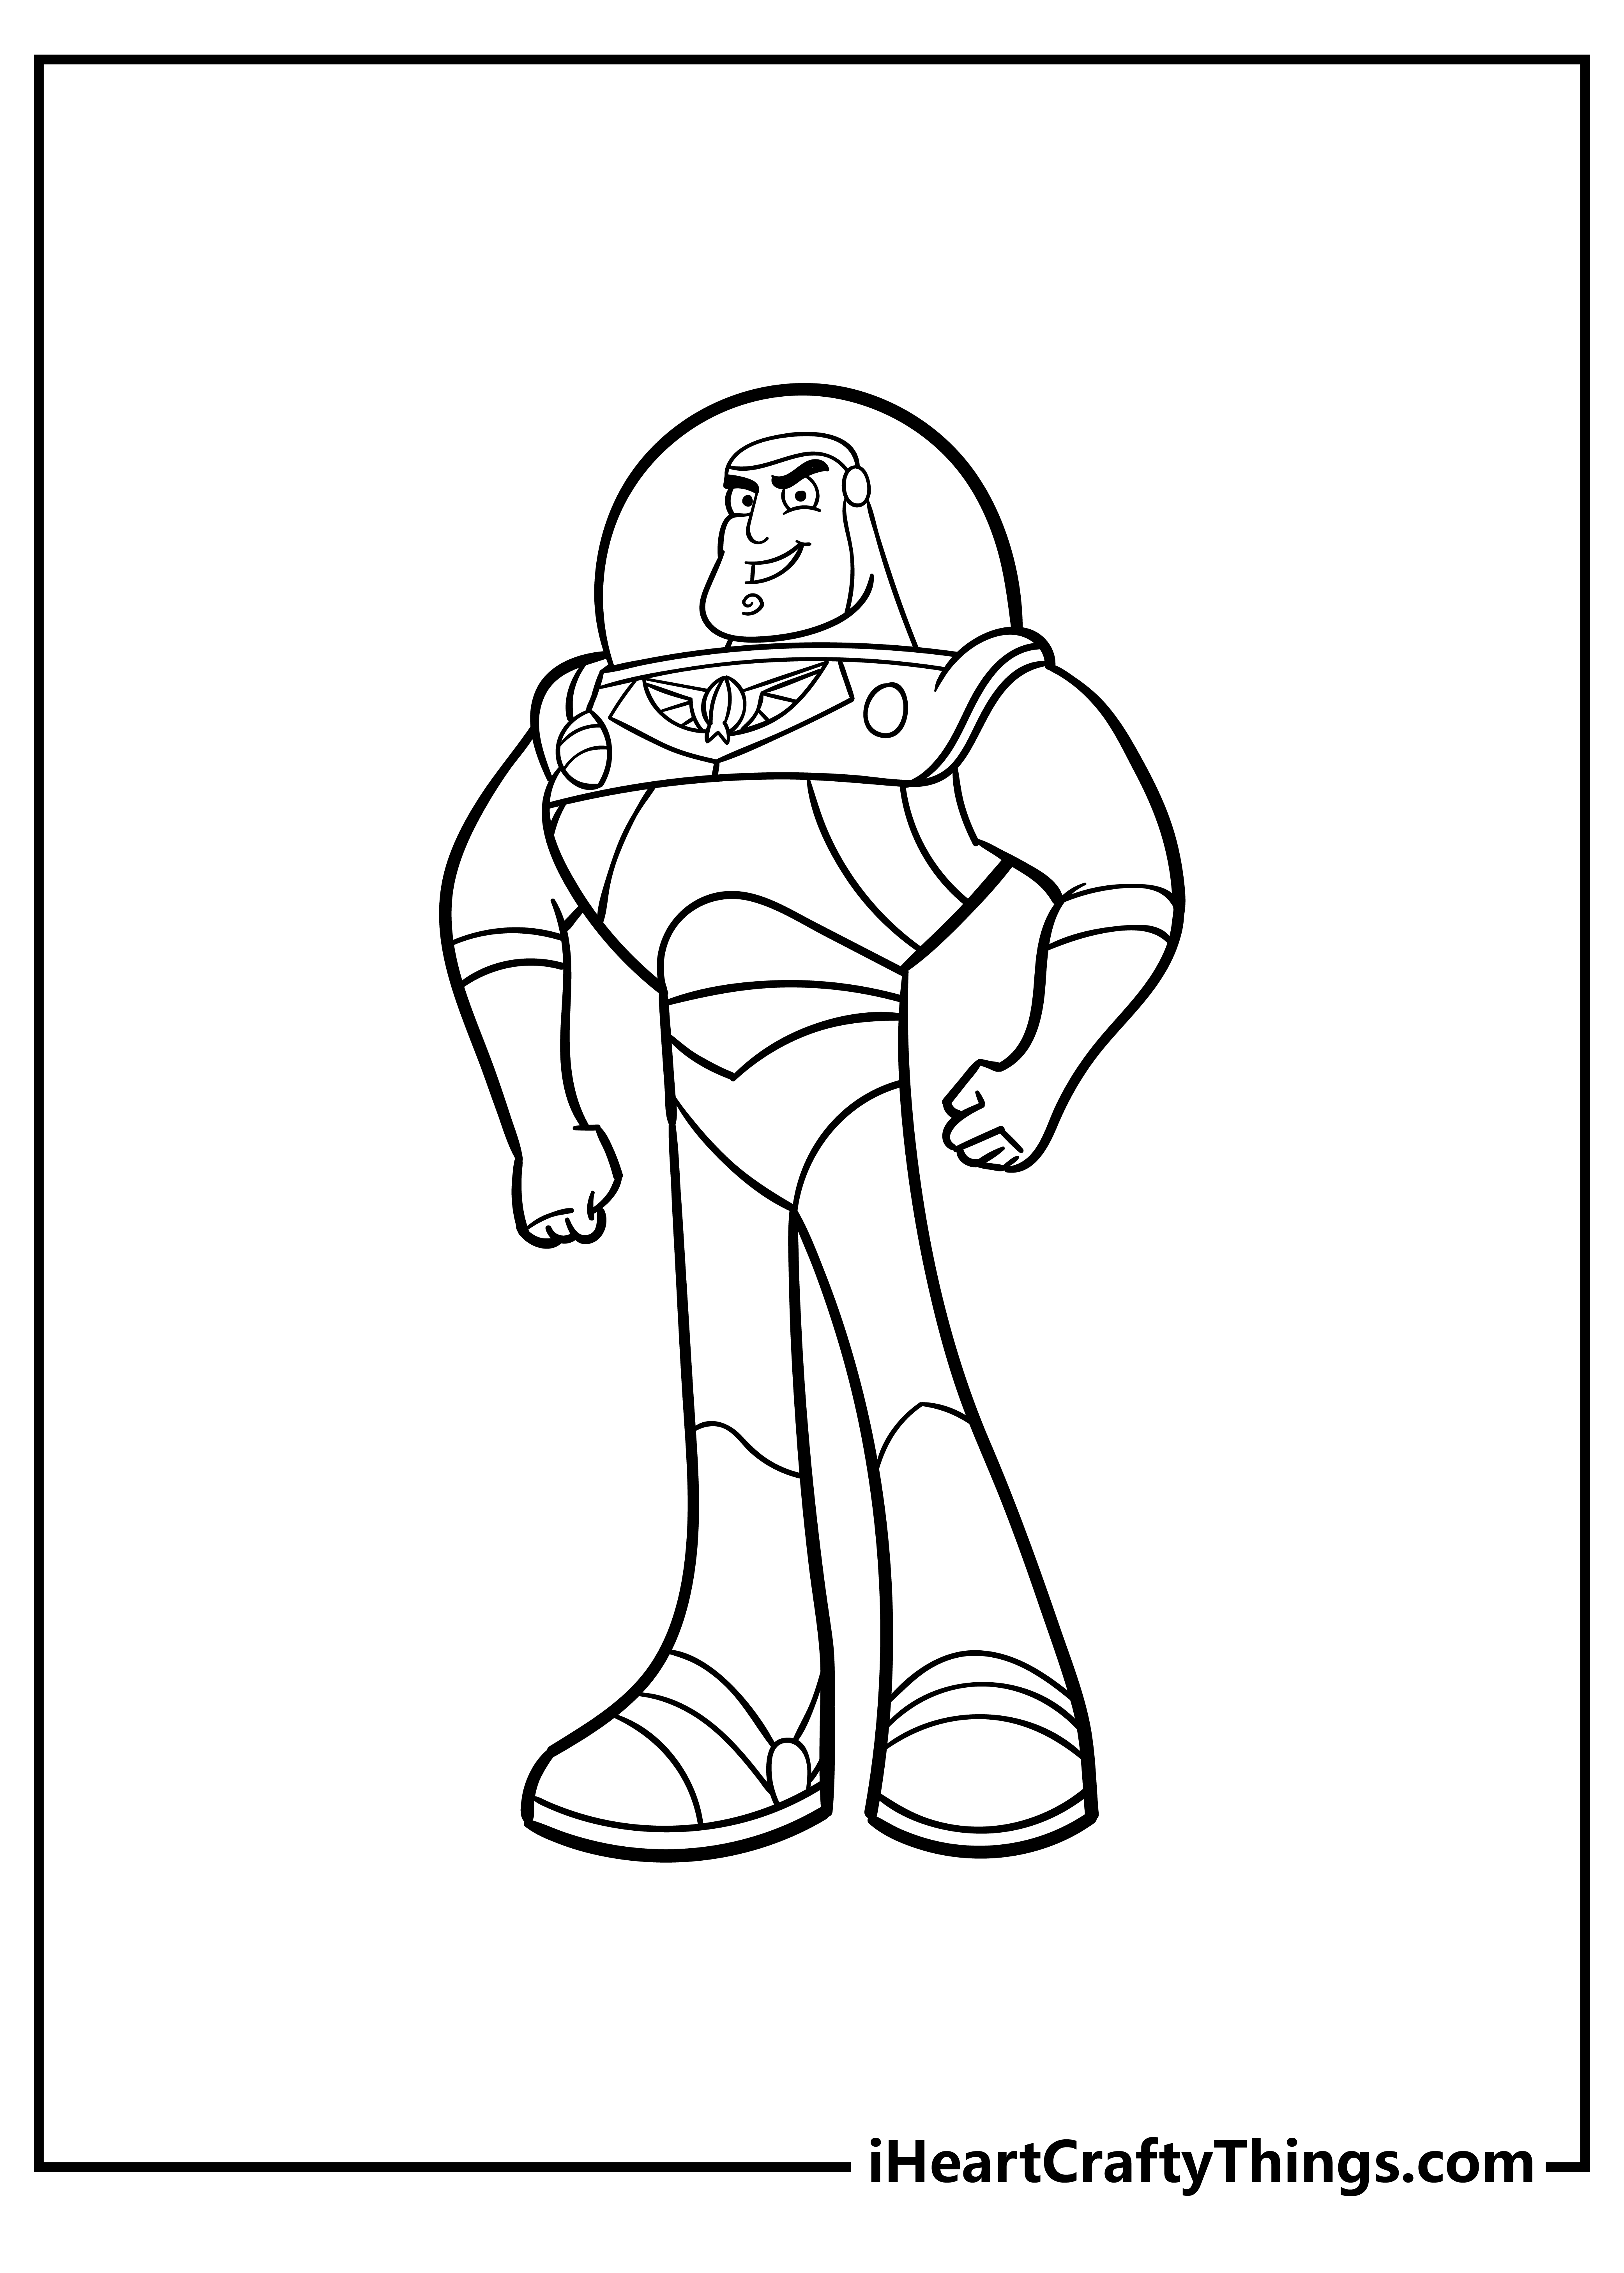 Buzz Lightyear Cartoon Coloring Pages for adults free printable